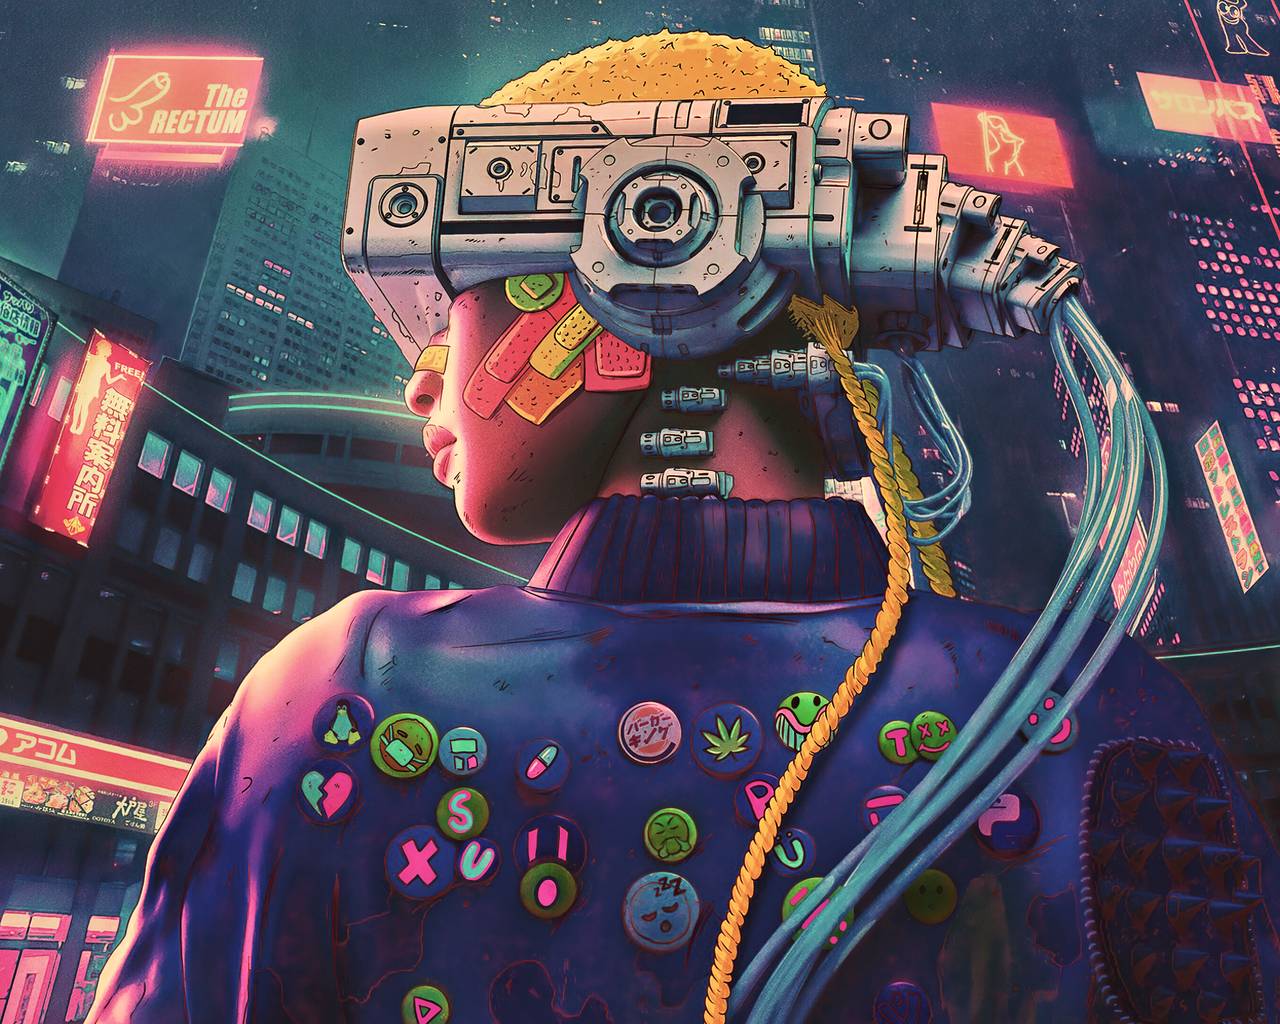 A cyberpunk girl with a camera for a head, neon lights and wires - Science